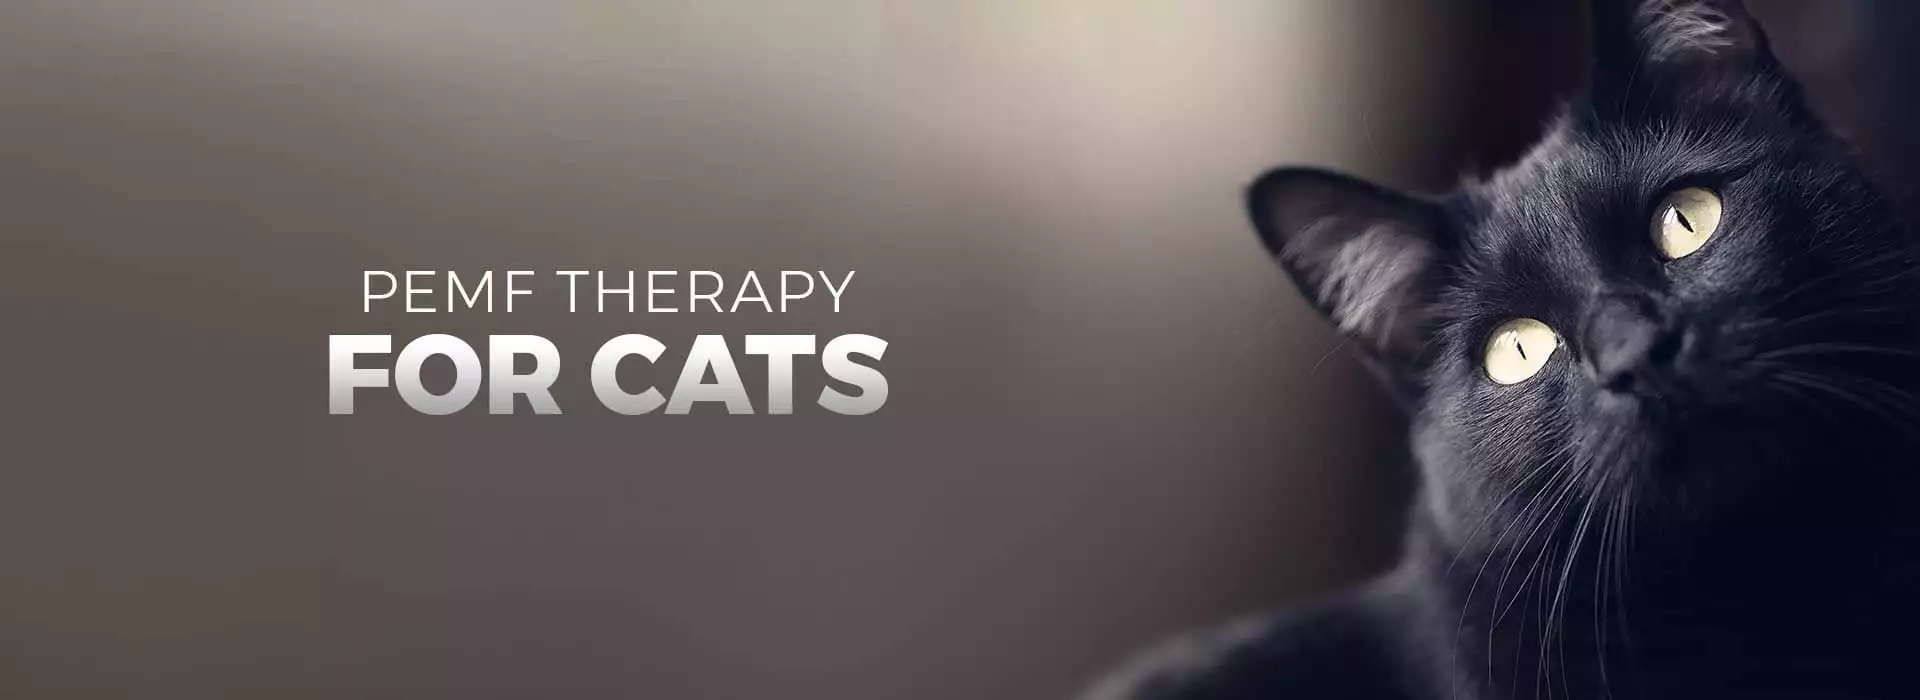 PEMF Therapy for the Cats